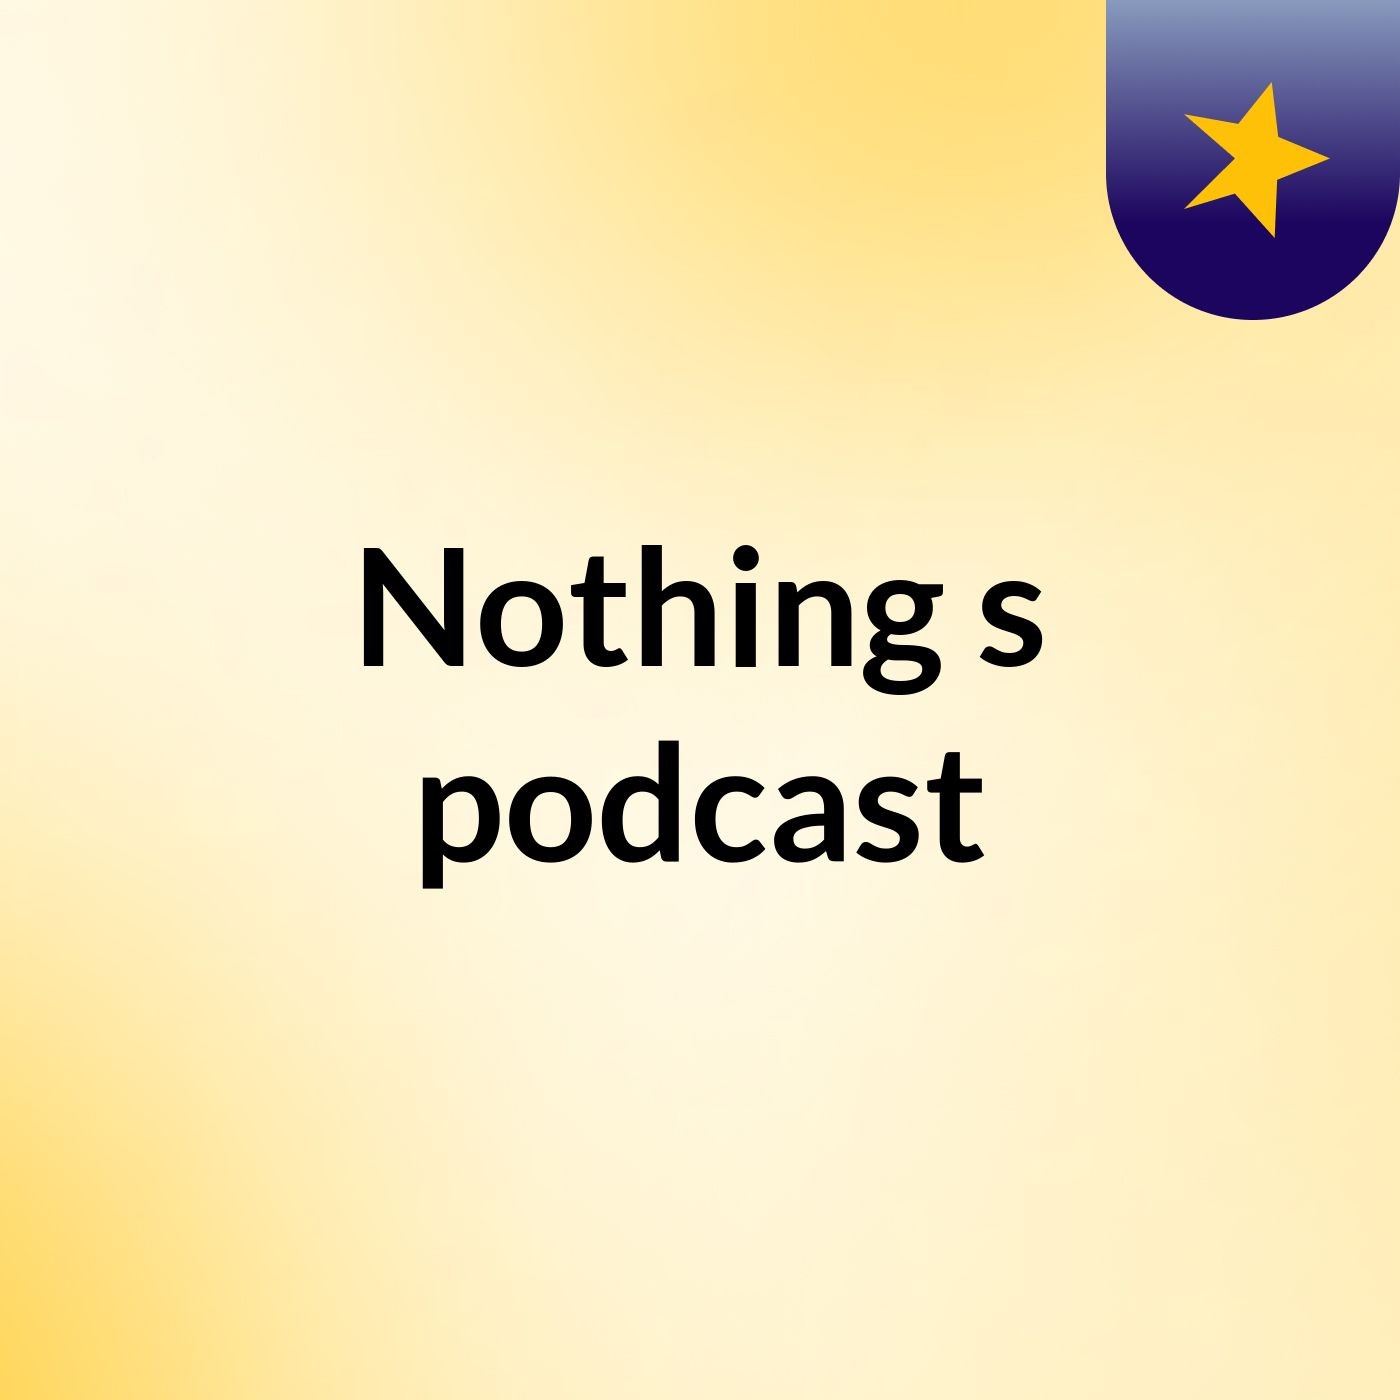 Nothing's podcast